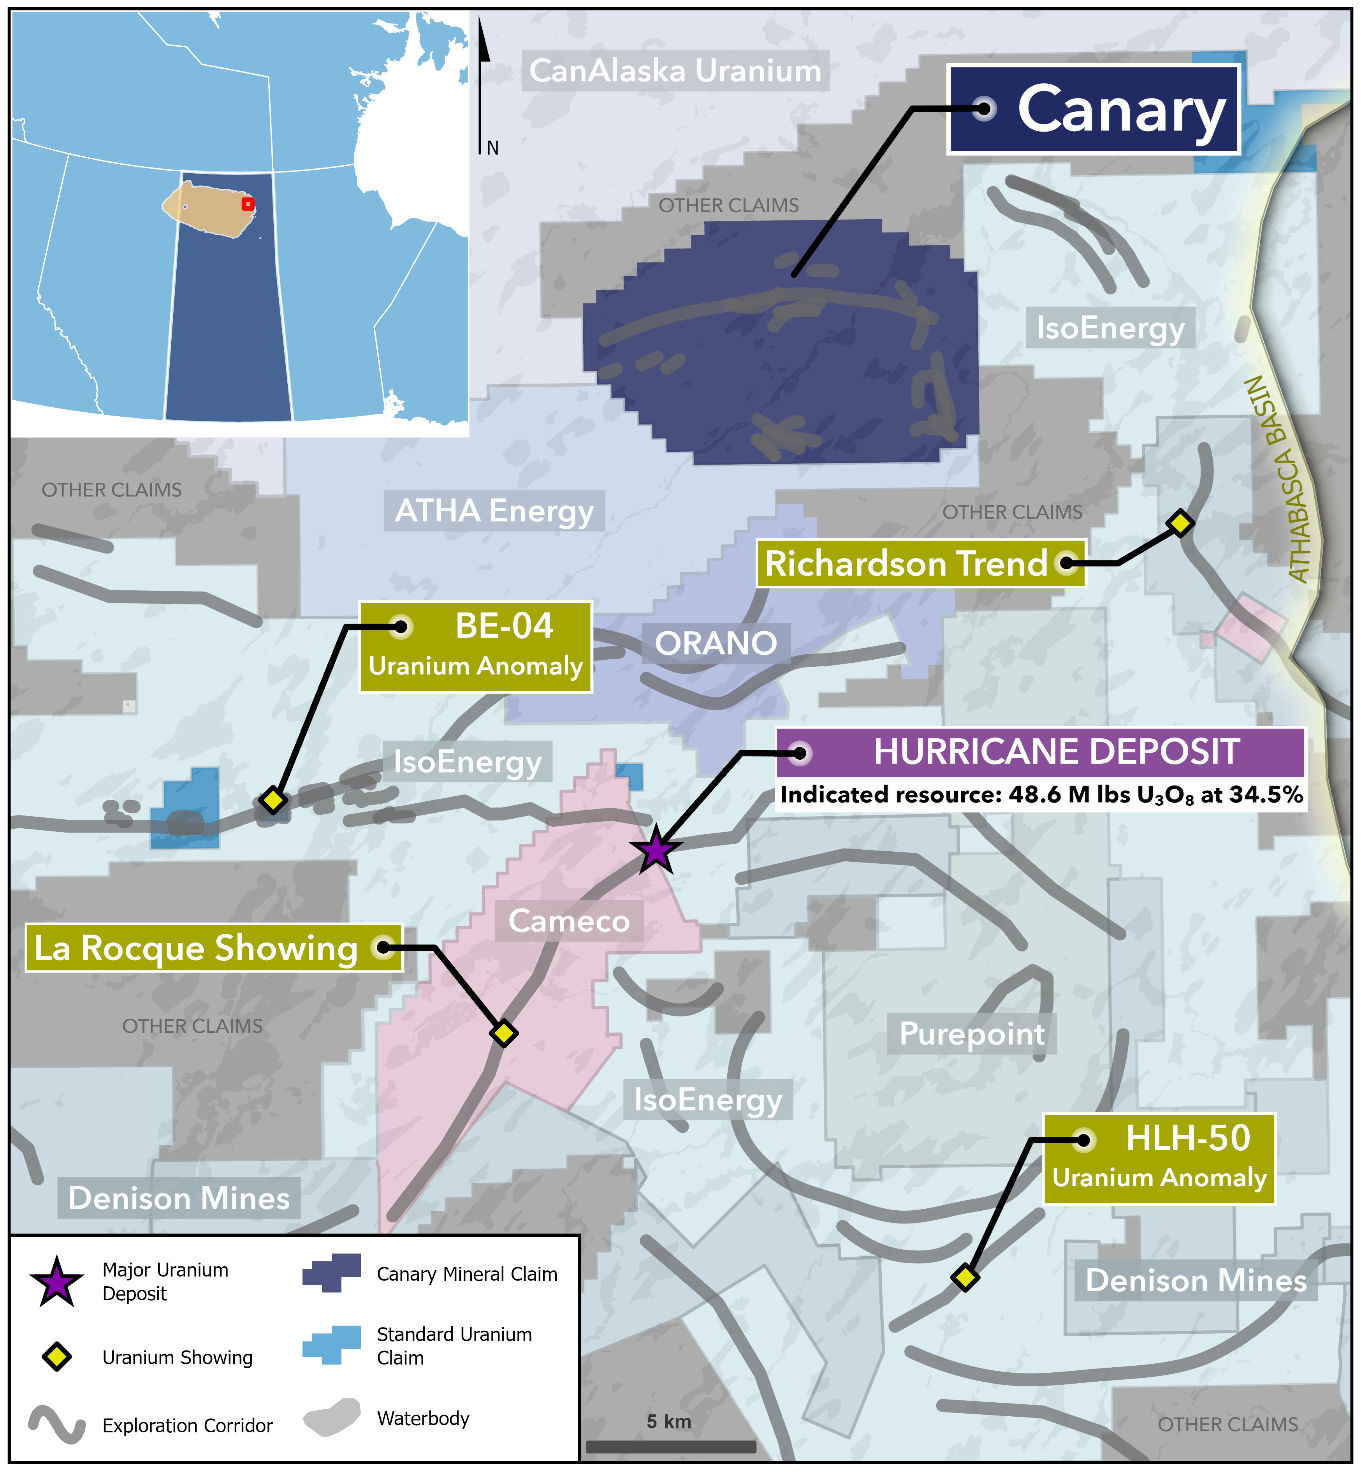 Figure 1. Overview of northeastern Athabasca Basin region, highlighting the Canary Project. Hurricane Deposit Indicated Resource from IsoEnergy Ltd. Technical Report on the Larocque East Project, Northern Saskatchewan, Canada. Dates July 8, 2022.